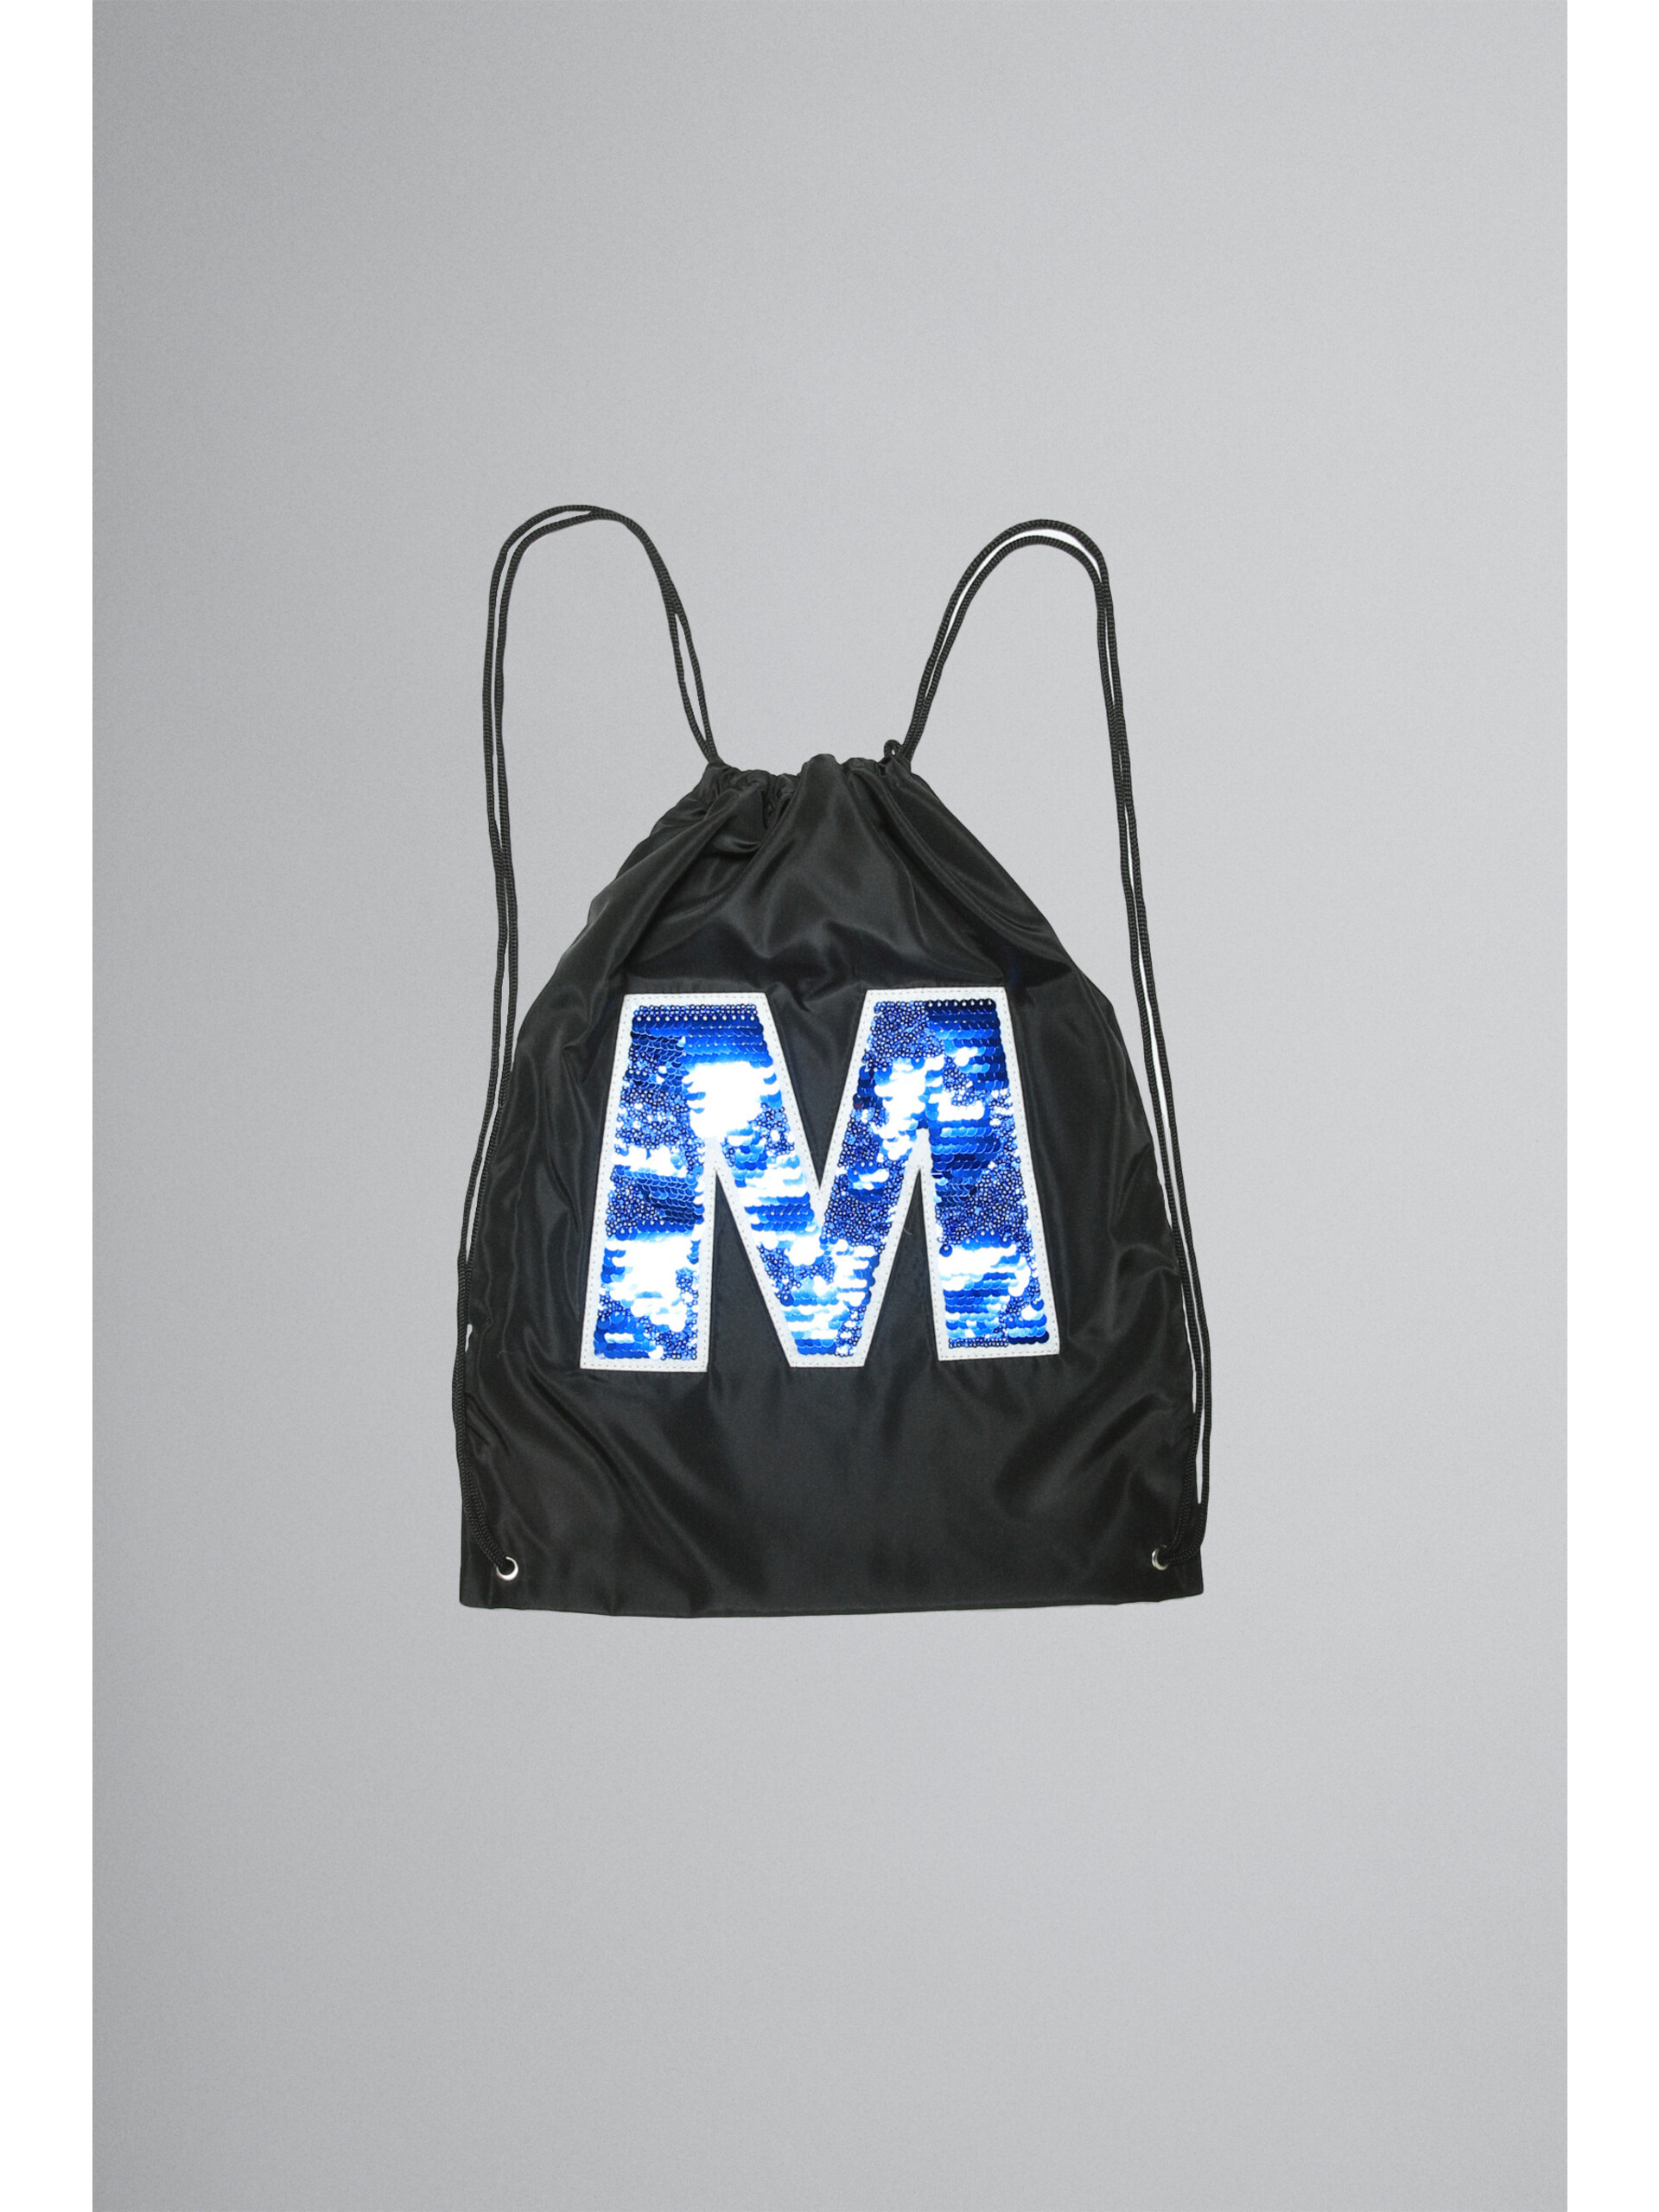 Black drawstring bag with sequin patch - Bags - Image 1